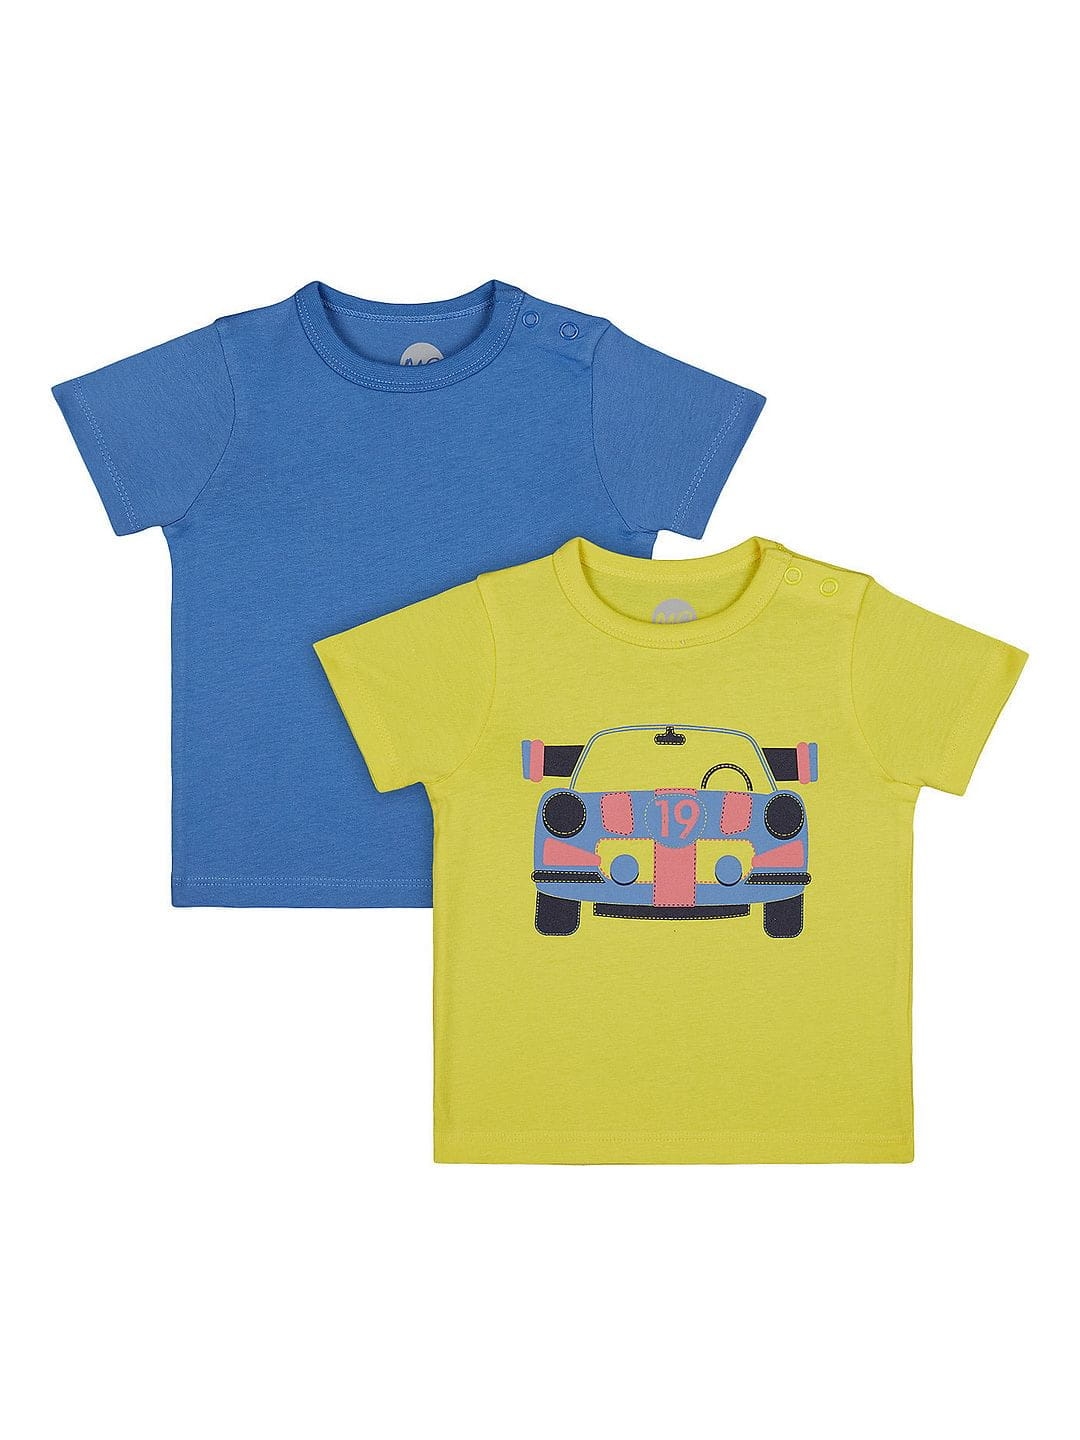 Mothercare | Boys Half Sleeve Round Neck Tee - Blue and Yellow 0